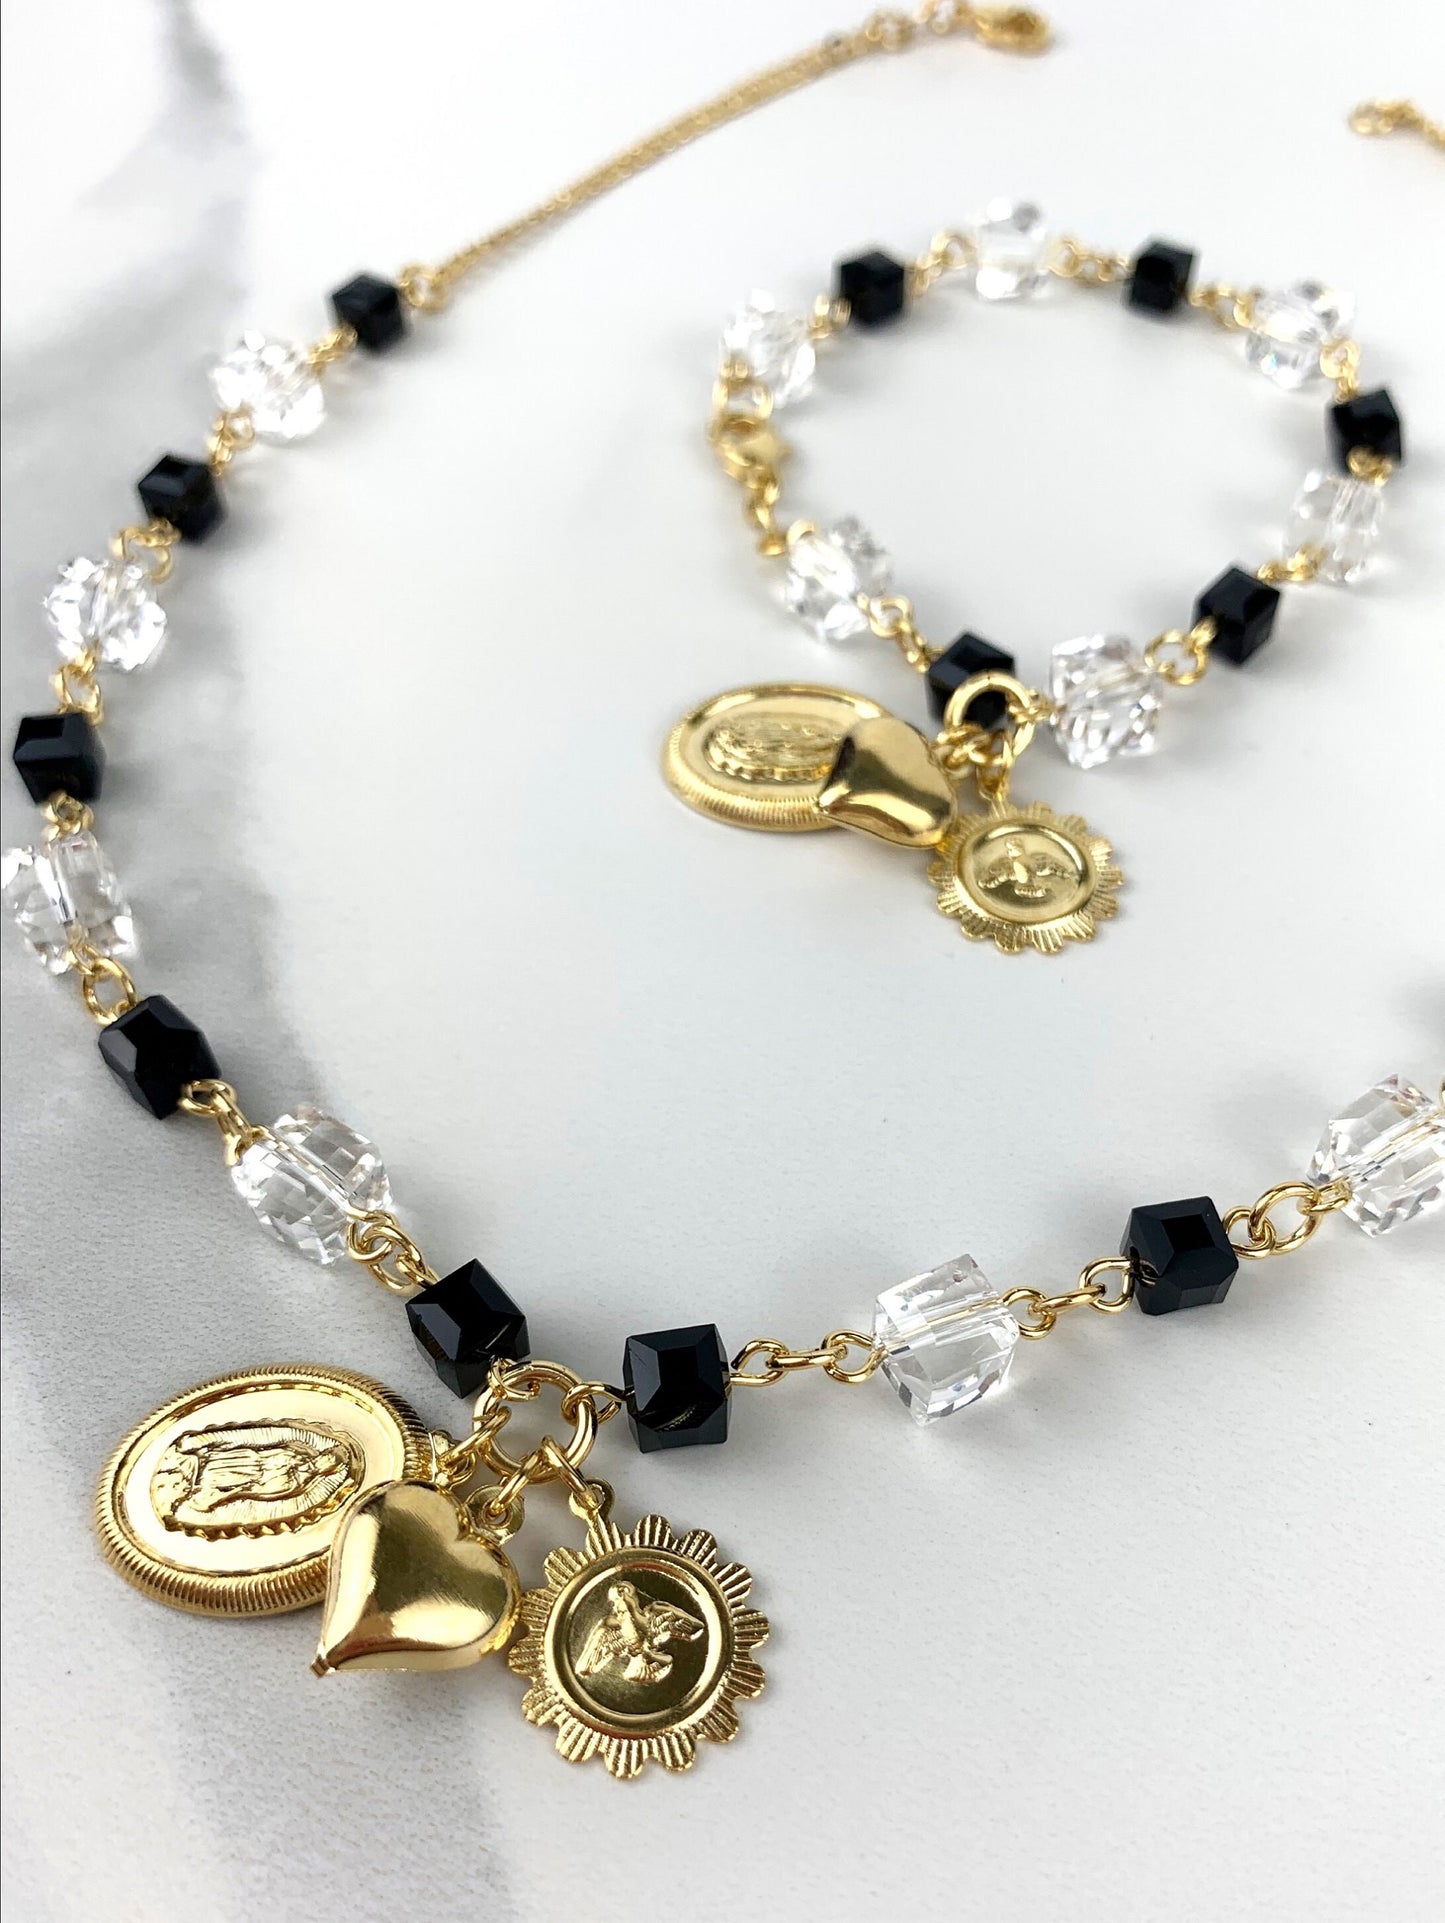 18k Gold Filled Black and Clear Beads Guadalupe Virgin, Dove of Peace, Puffy Heart Charms Necklace and Bracelet Set Wholesale Jewelry